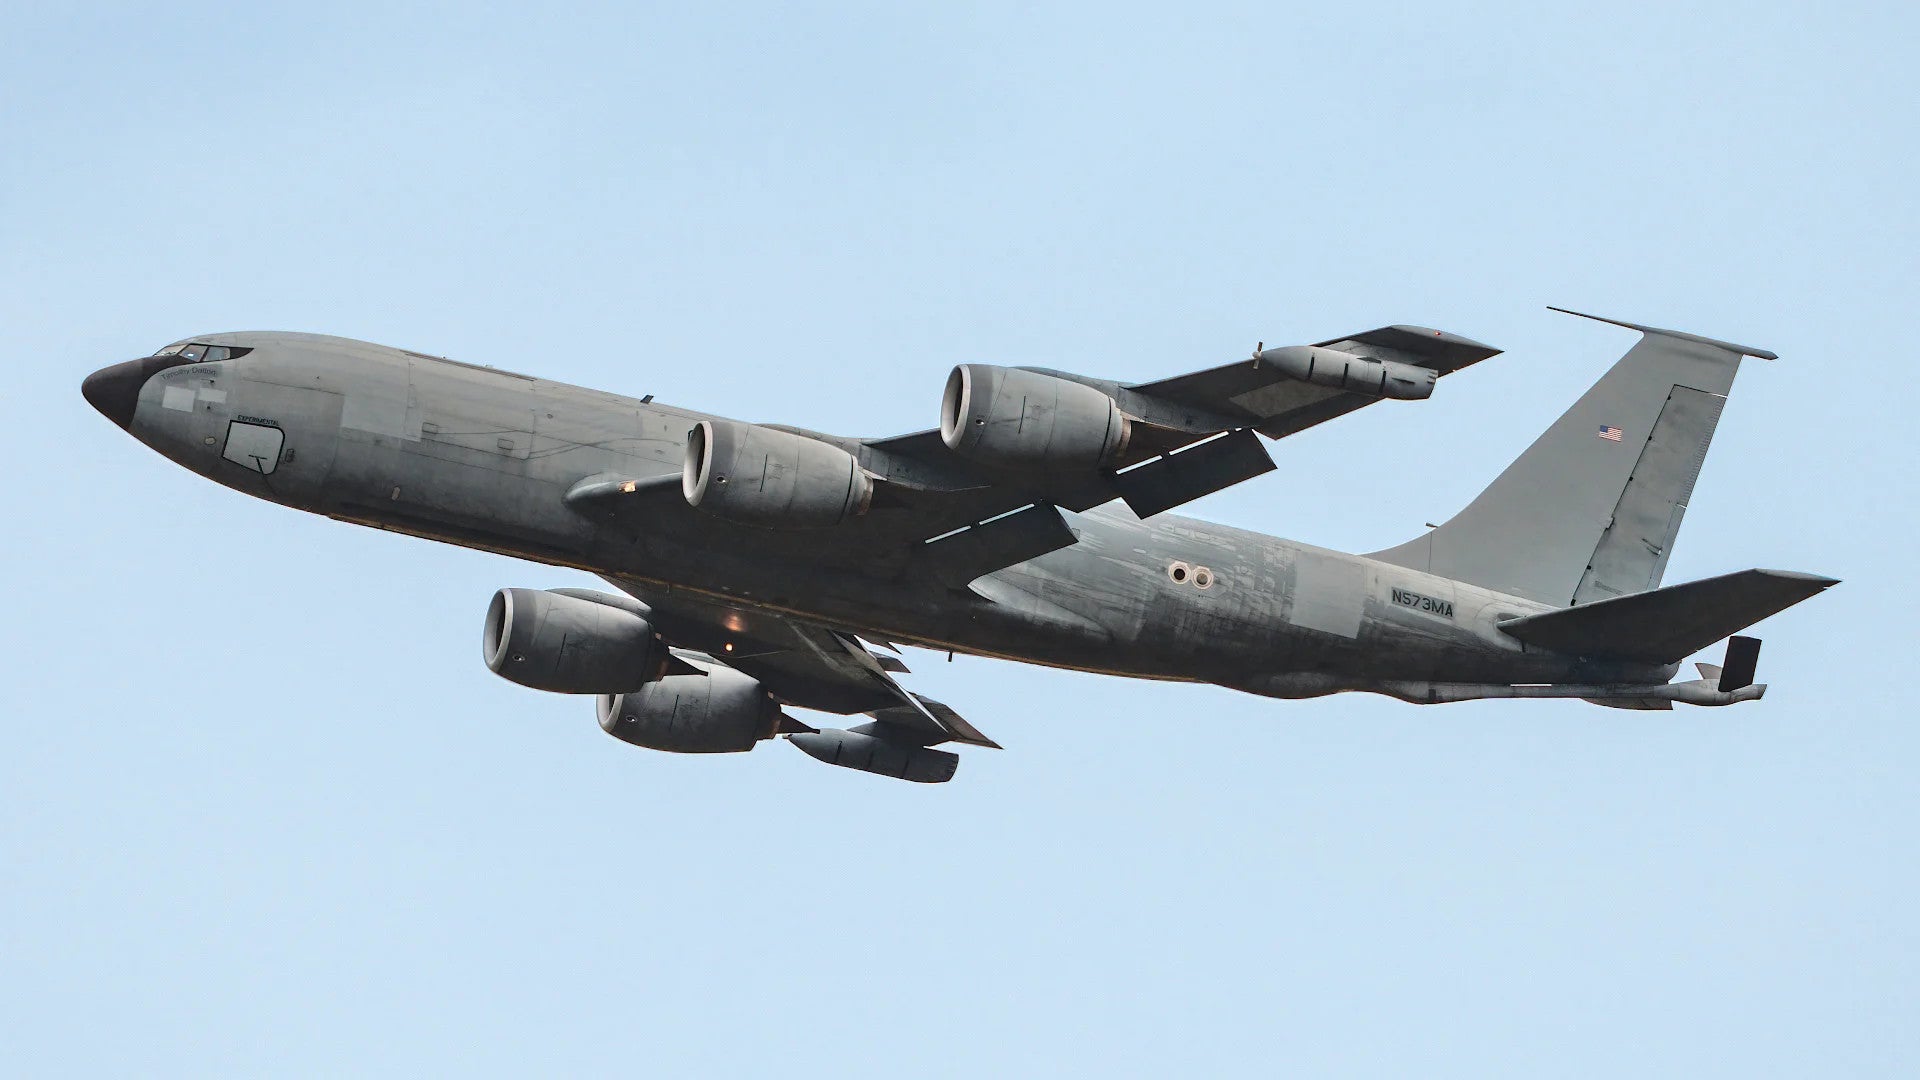 US Air Force aircraft have been refueled by private tanker planes for the first time ever.